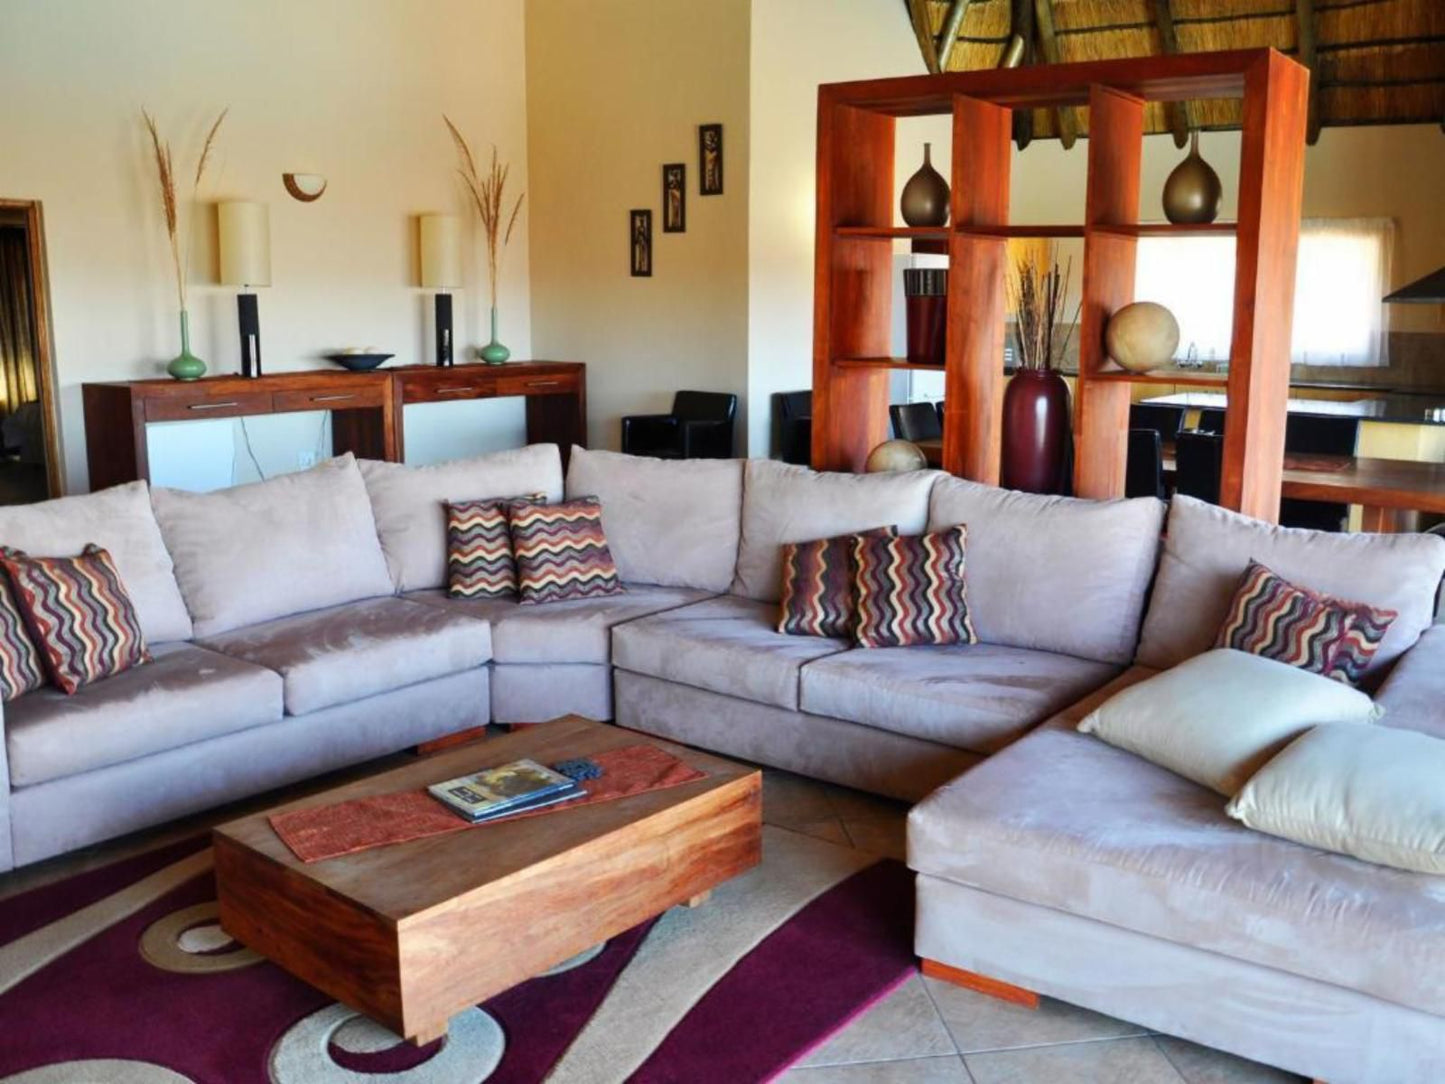 Dinkweng Safari Camp Vaalwater Limpopo Province South Africa Living Room